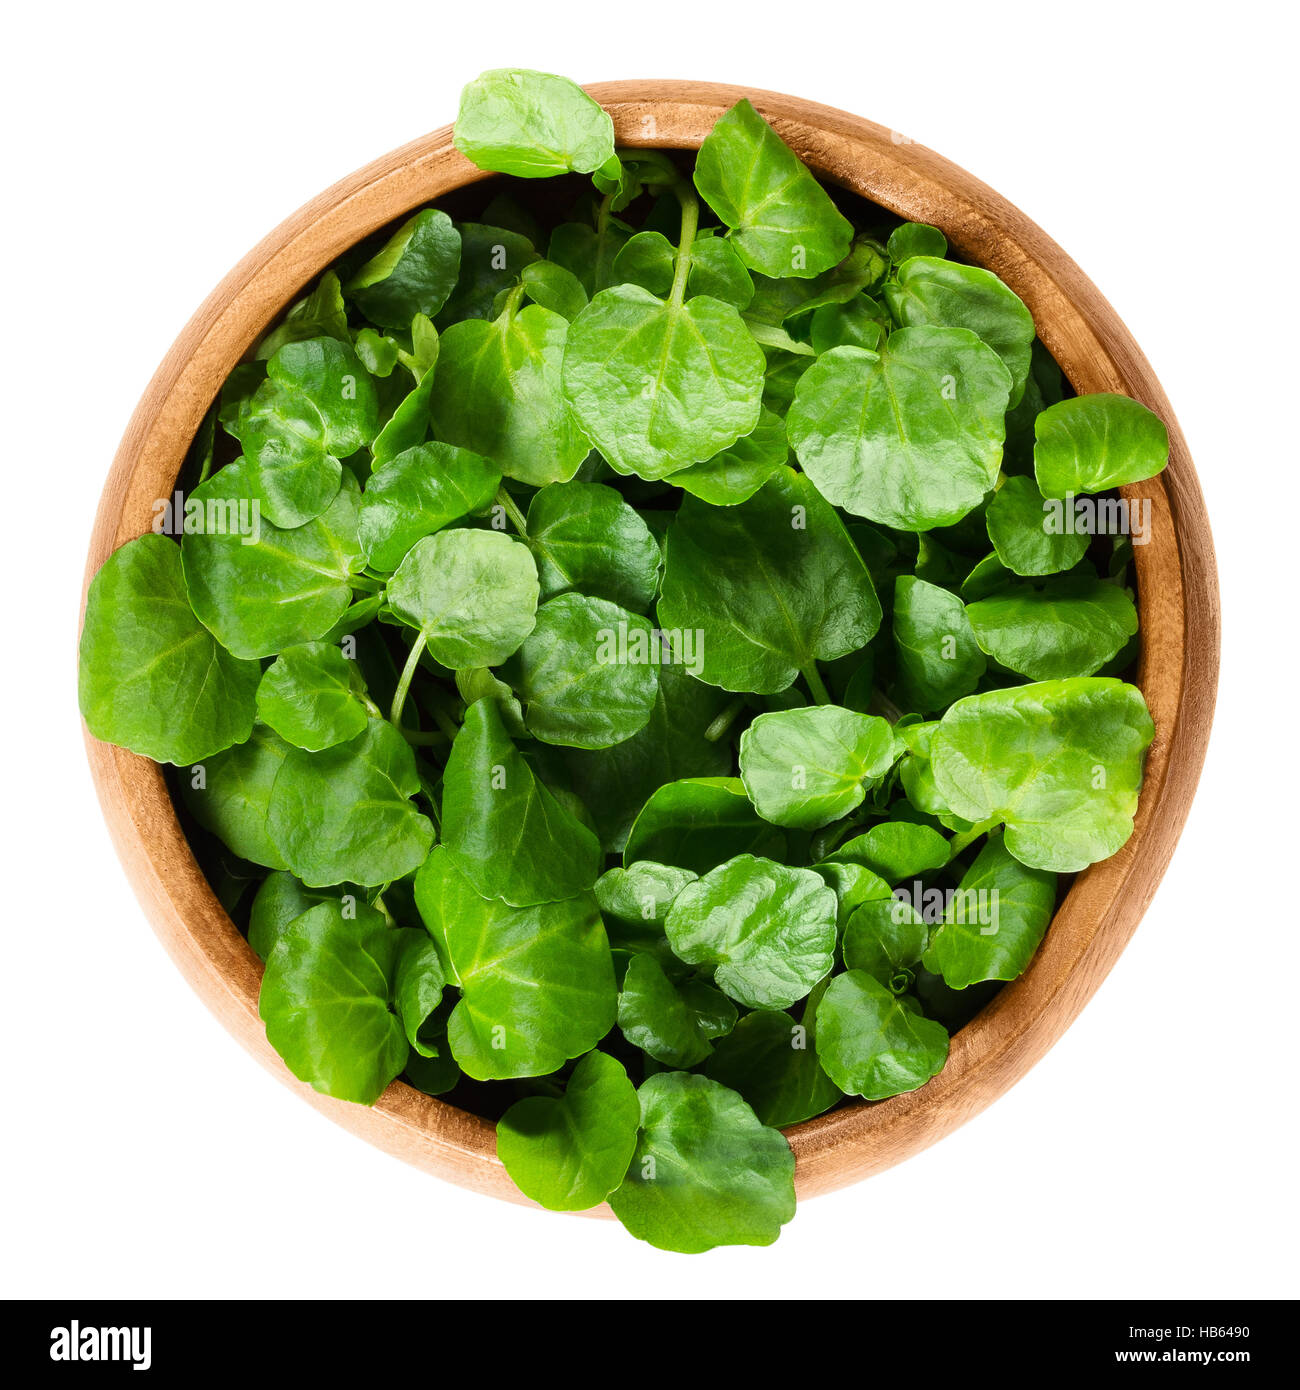 Watercress in wooden bowl. Nasturtium officinale, an edible green aquatic plant and leaf vegetable, used in salads or in soups. Stock Photo